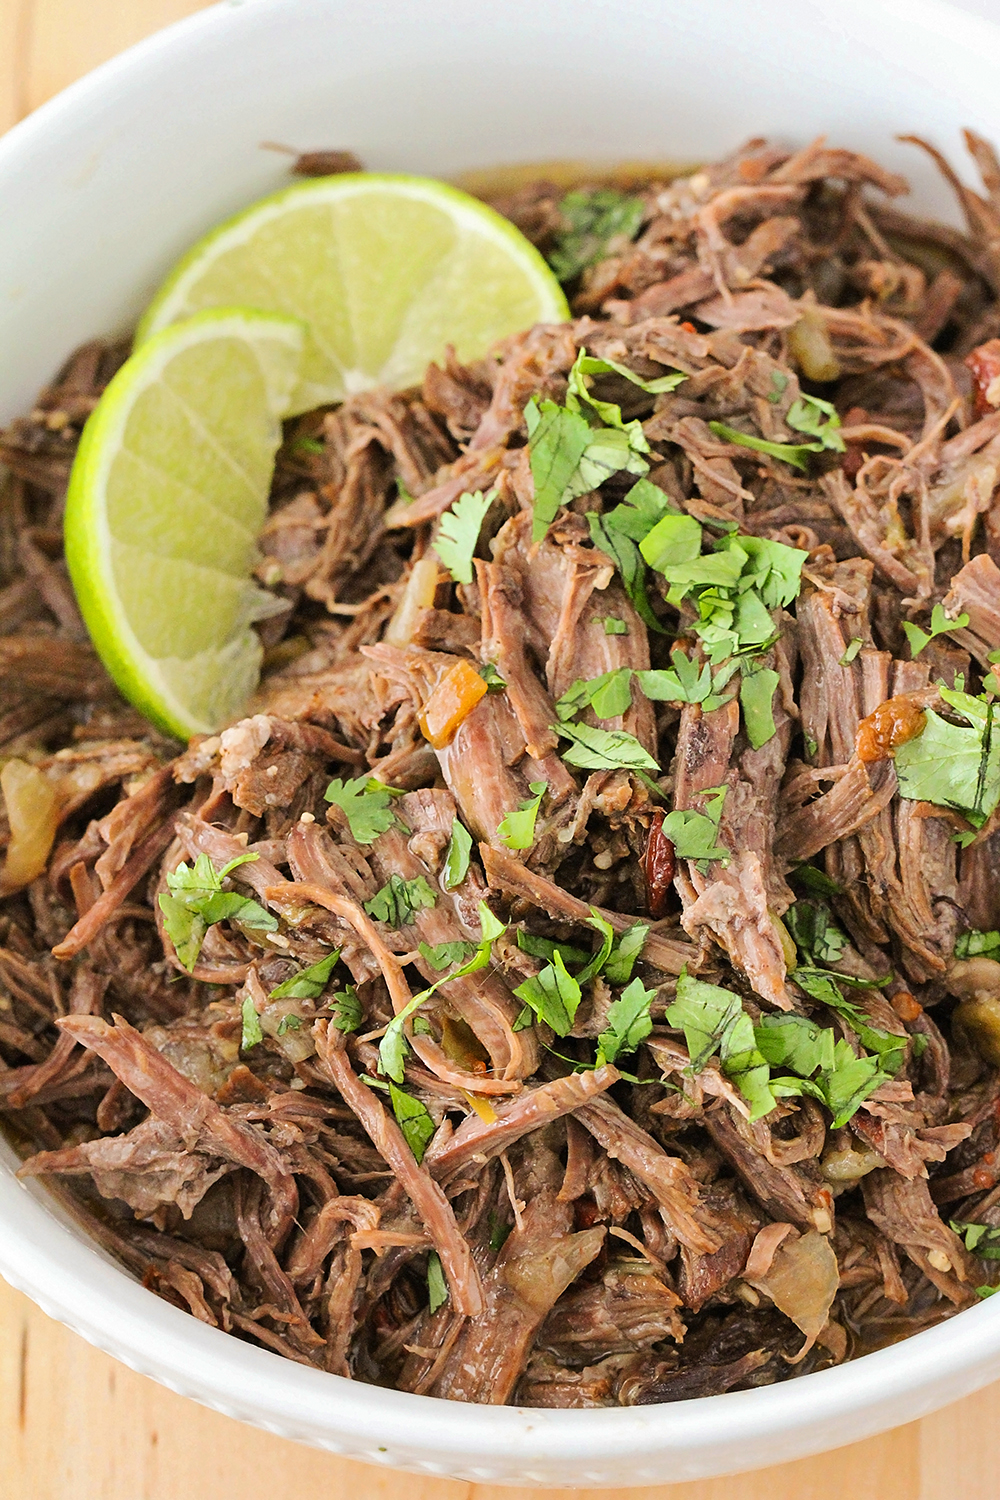 These juicy and flavorful Instant Pot barbacoa tacos are so delicious and easy to make, too!